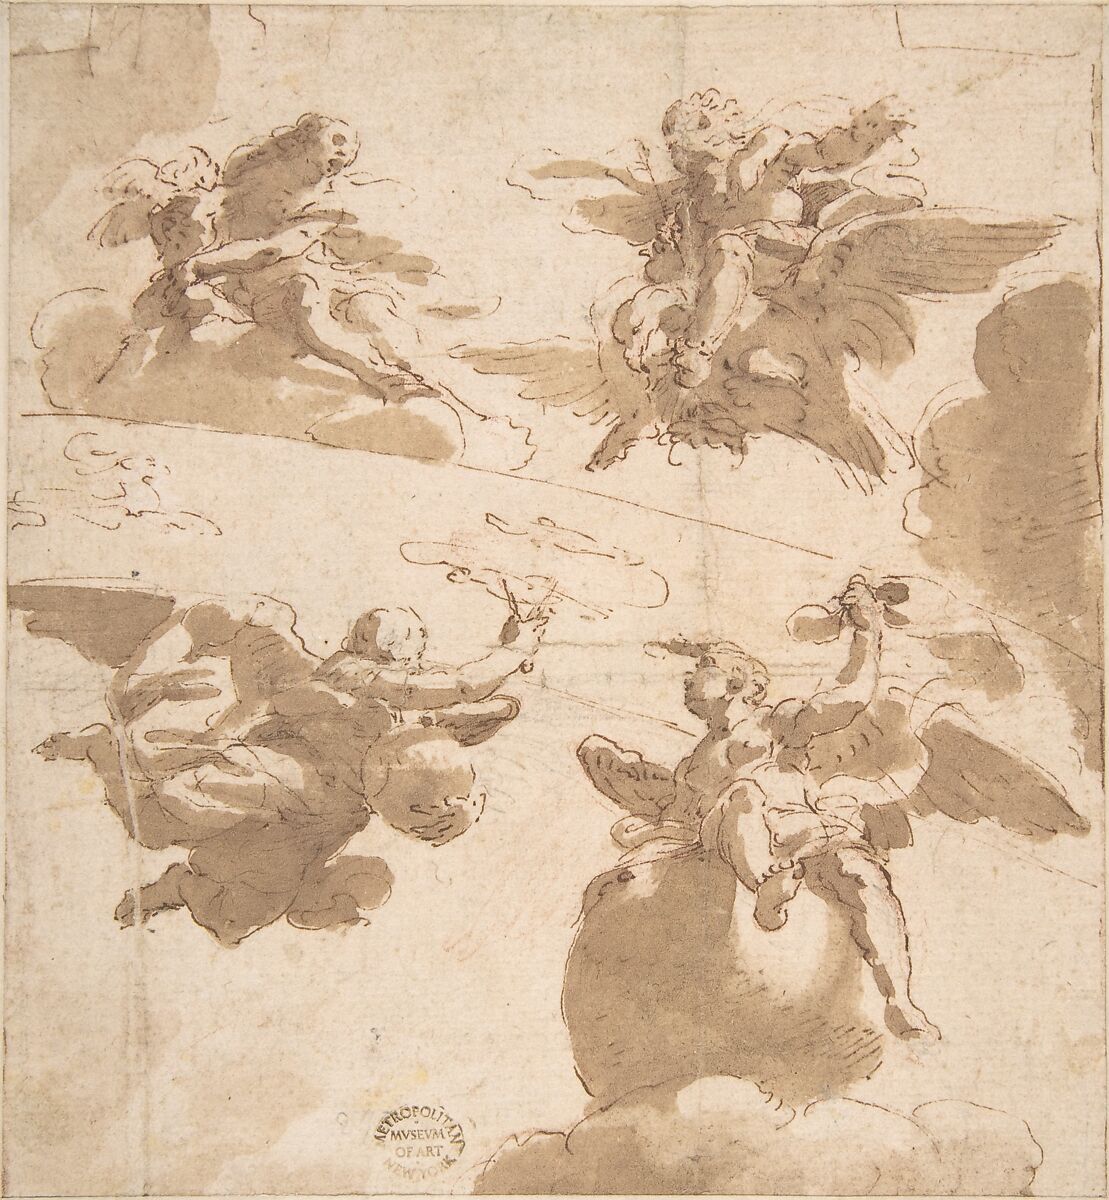 Studies of Figures on Clouds, Anonymous, Italian, Roman-Bolognese, 17th century, Pen and brown ink, brush and brown wash, over traces of black and red chalk on light brown paper. Fragments of framing outlines visible at left, right, and upper edges 